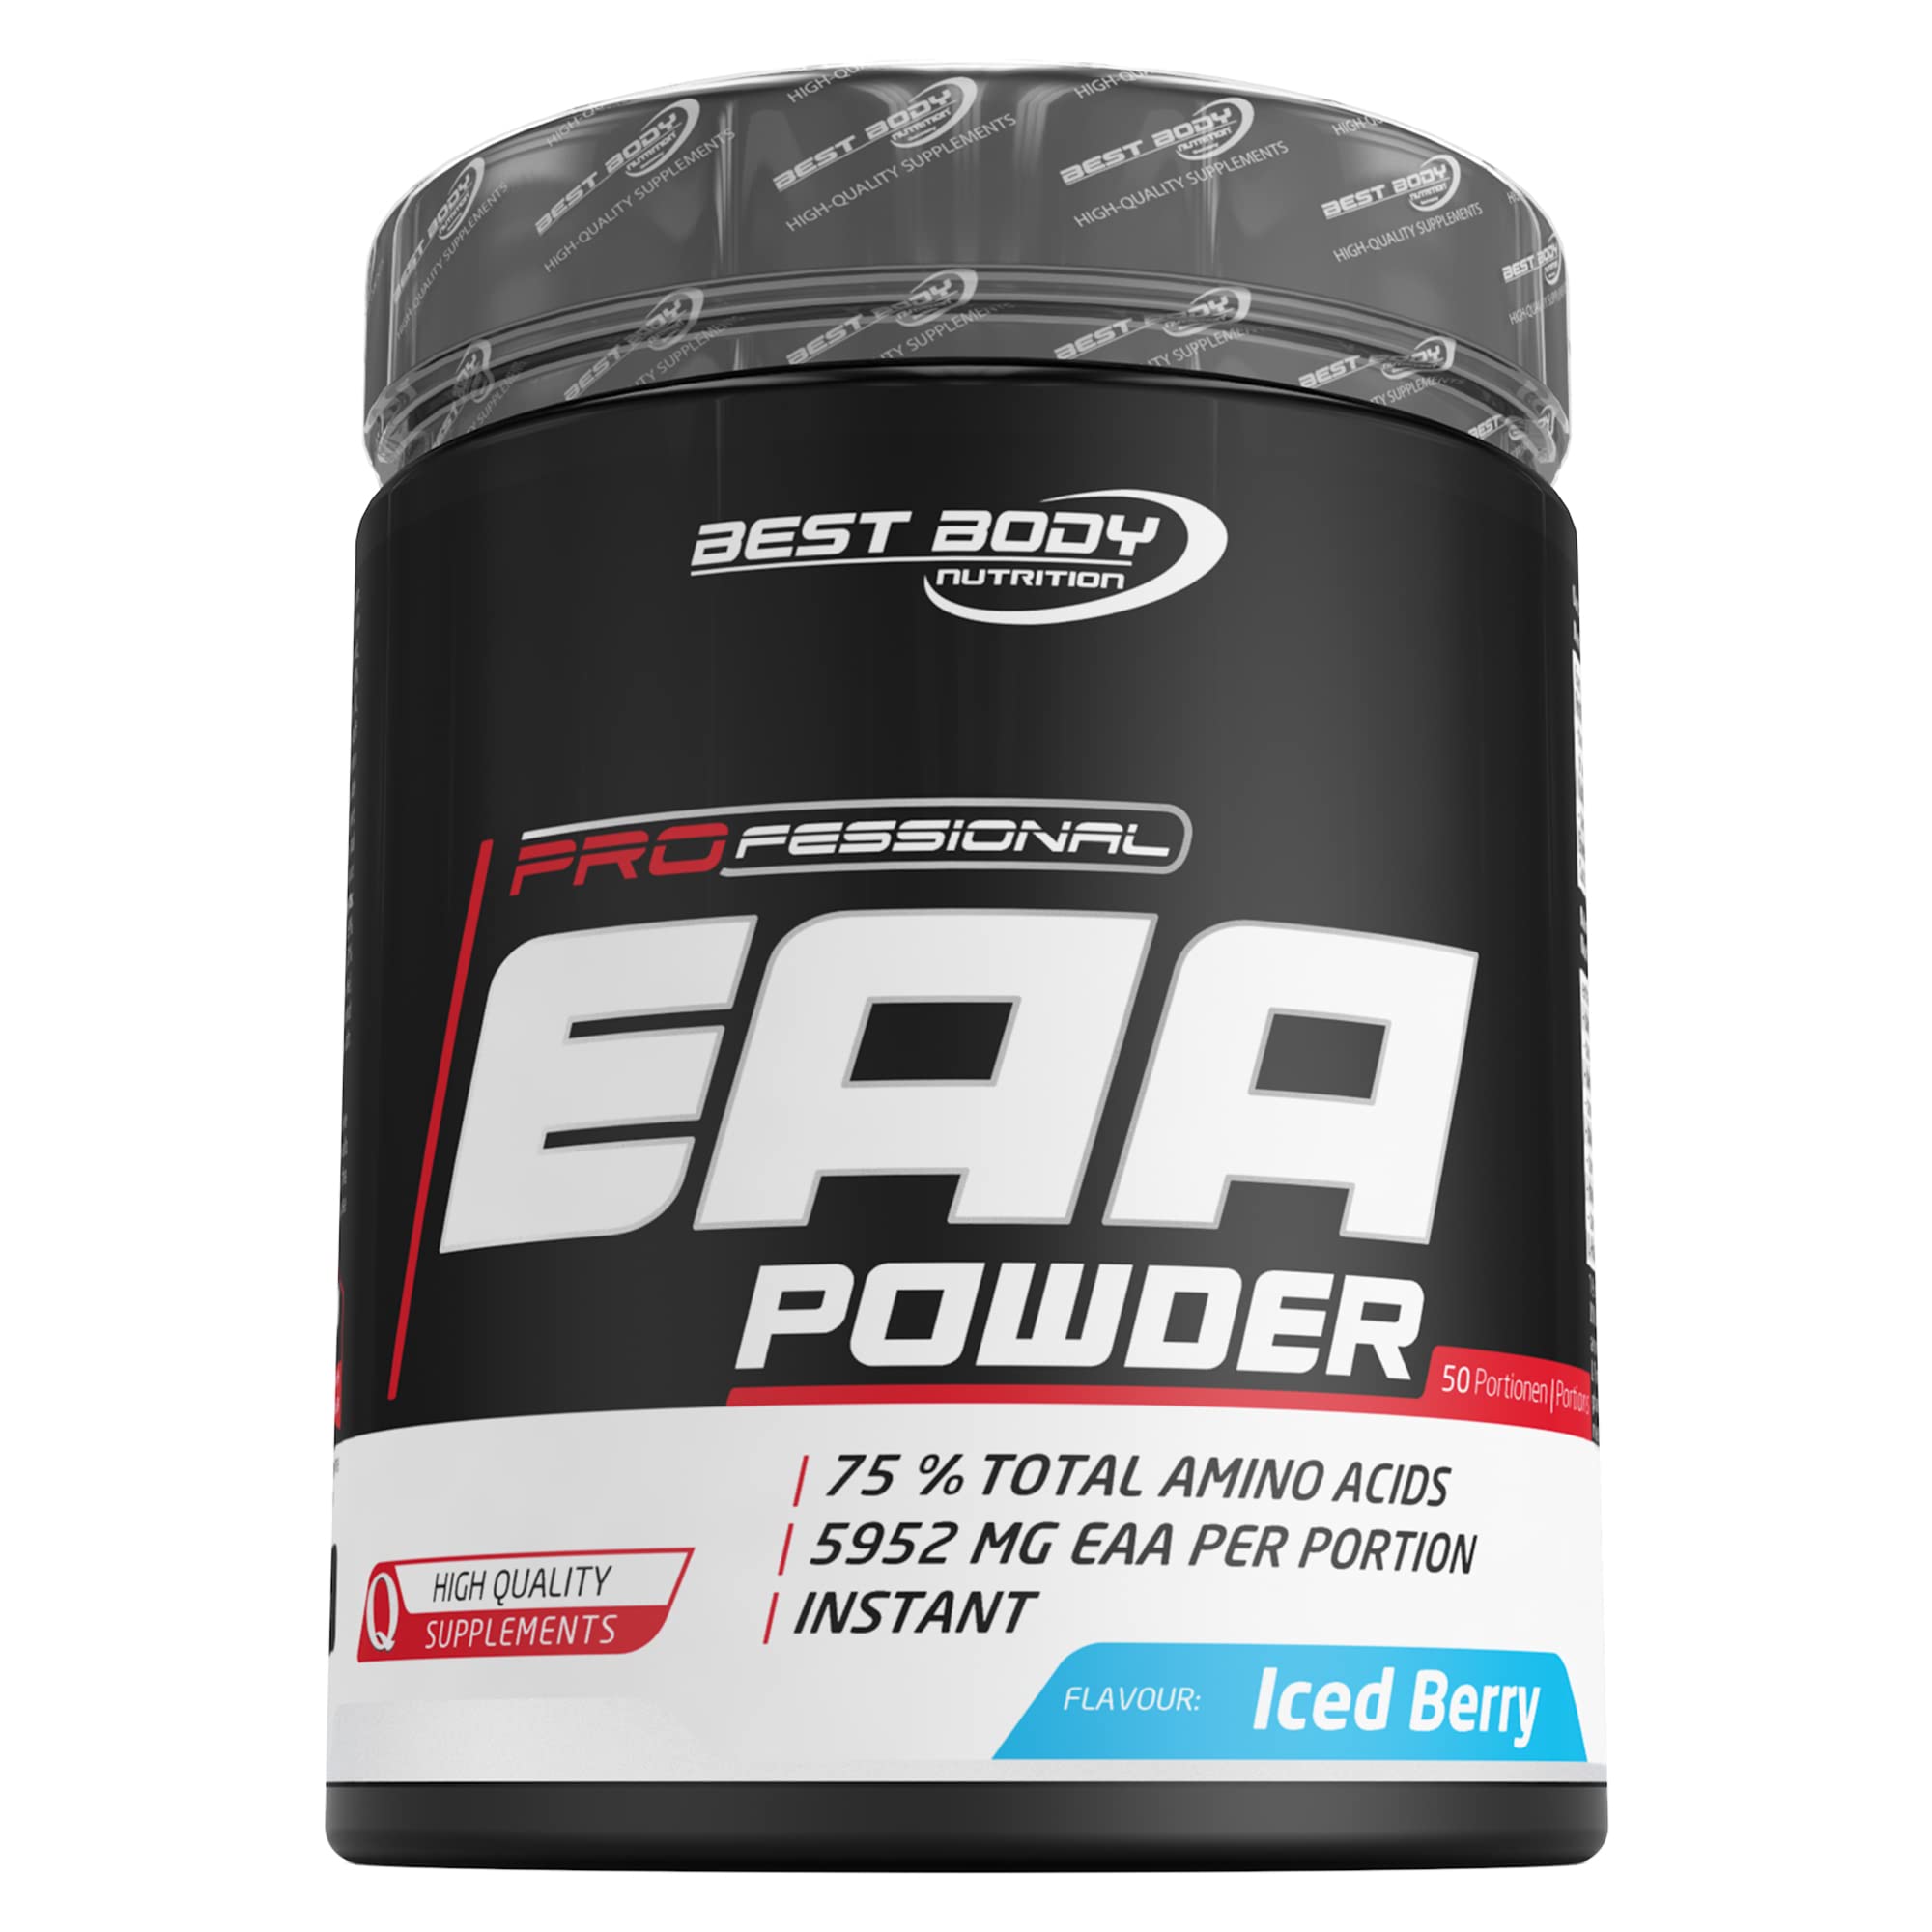 Best Body Nutrition Professional EAA Powder Iced Berry, 5952 mg EAA pro Portion, 450 g